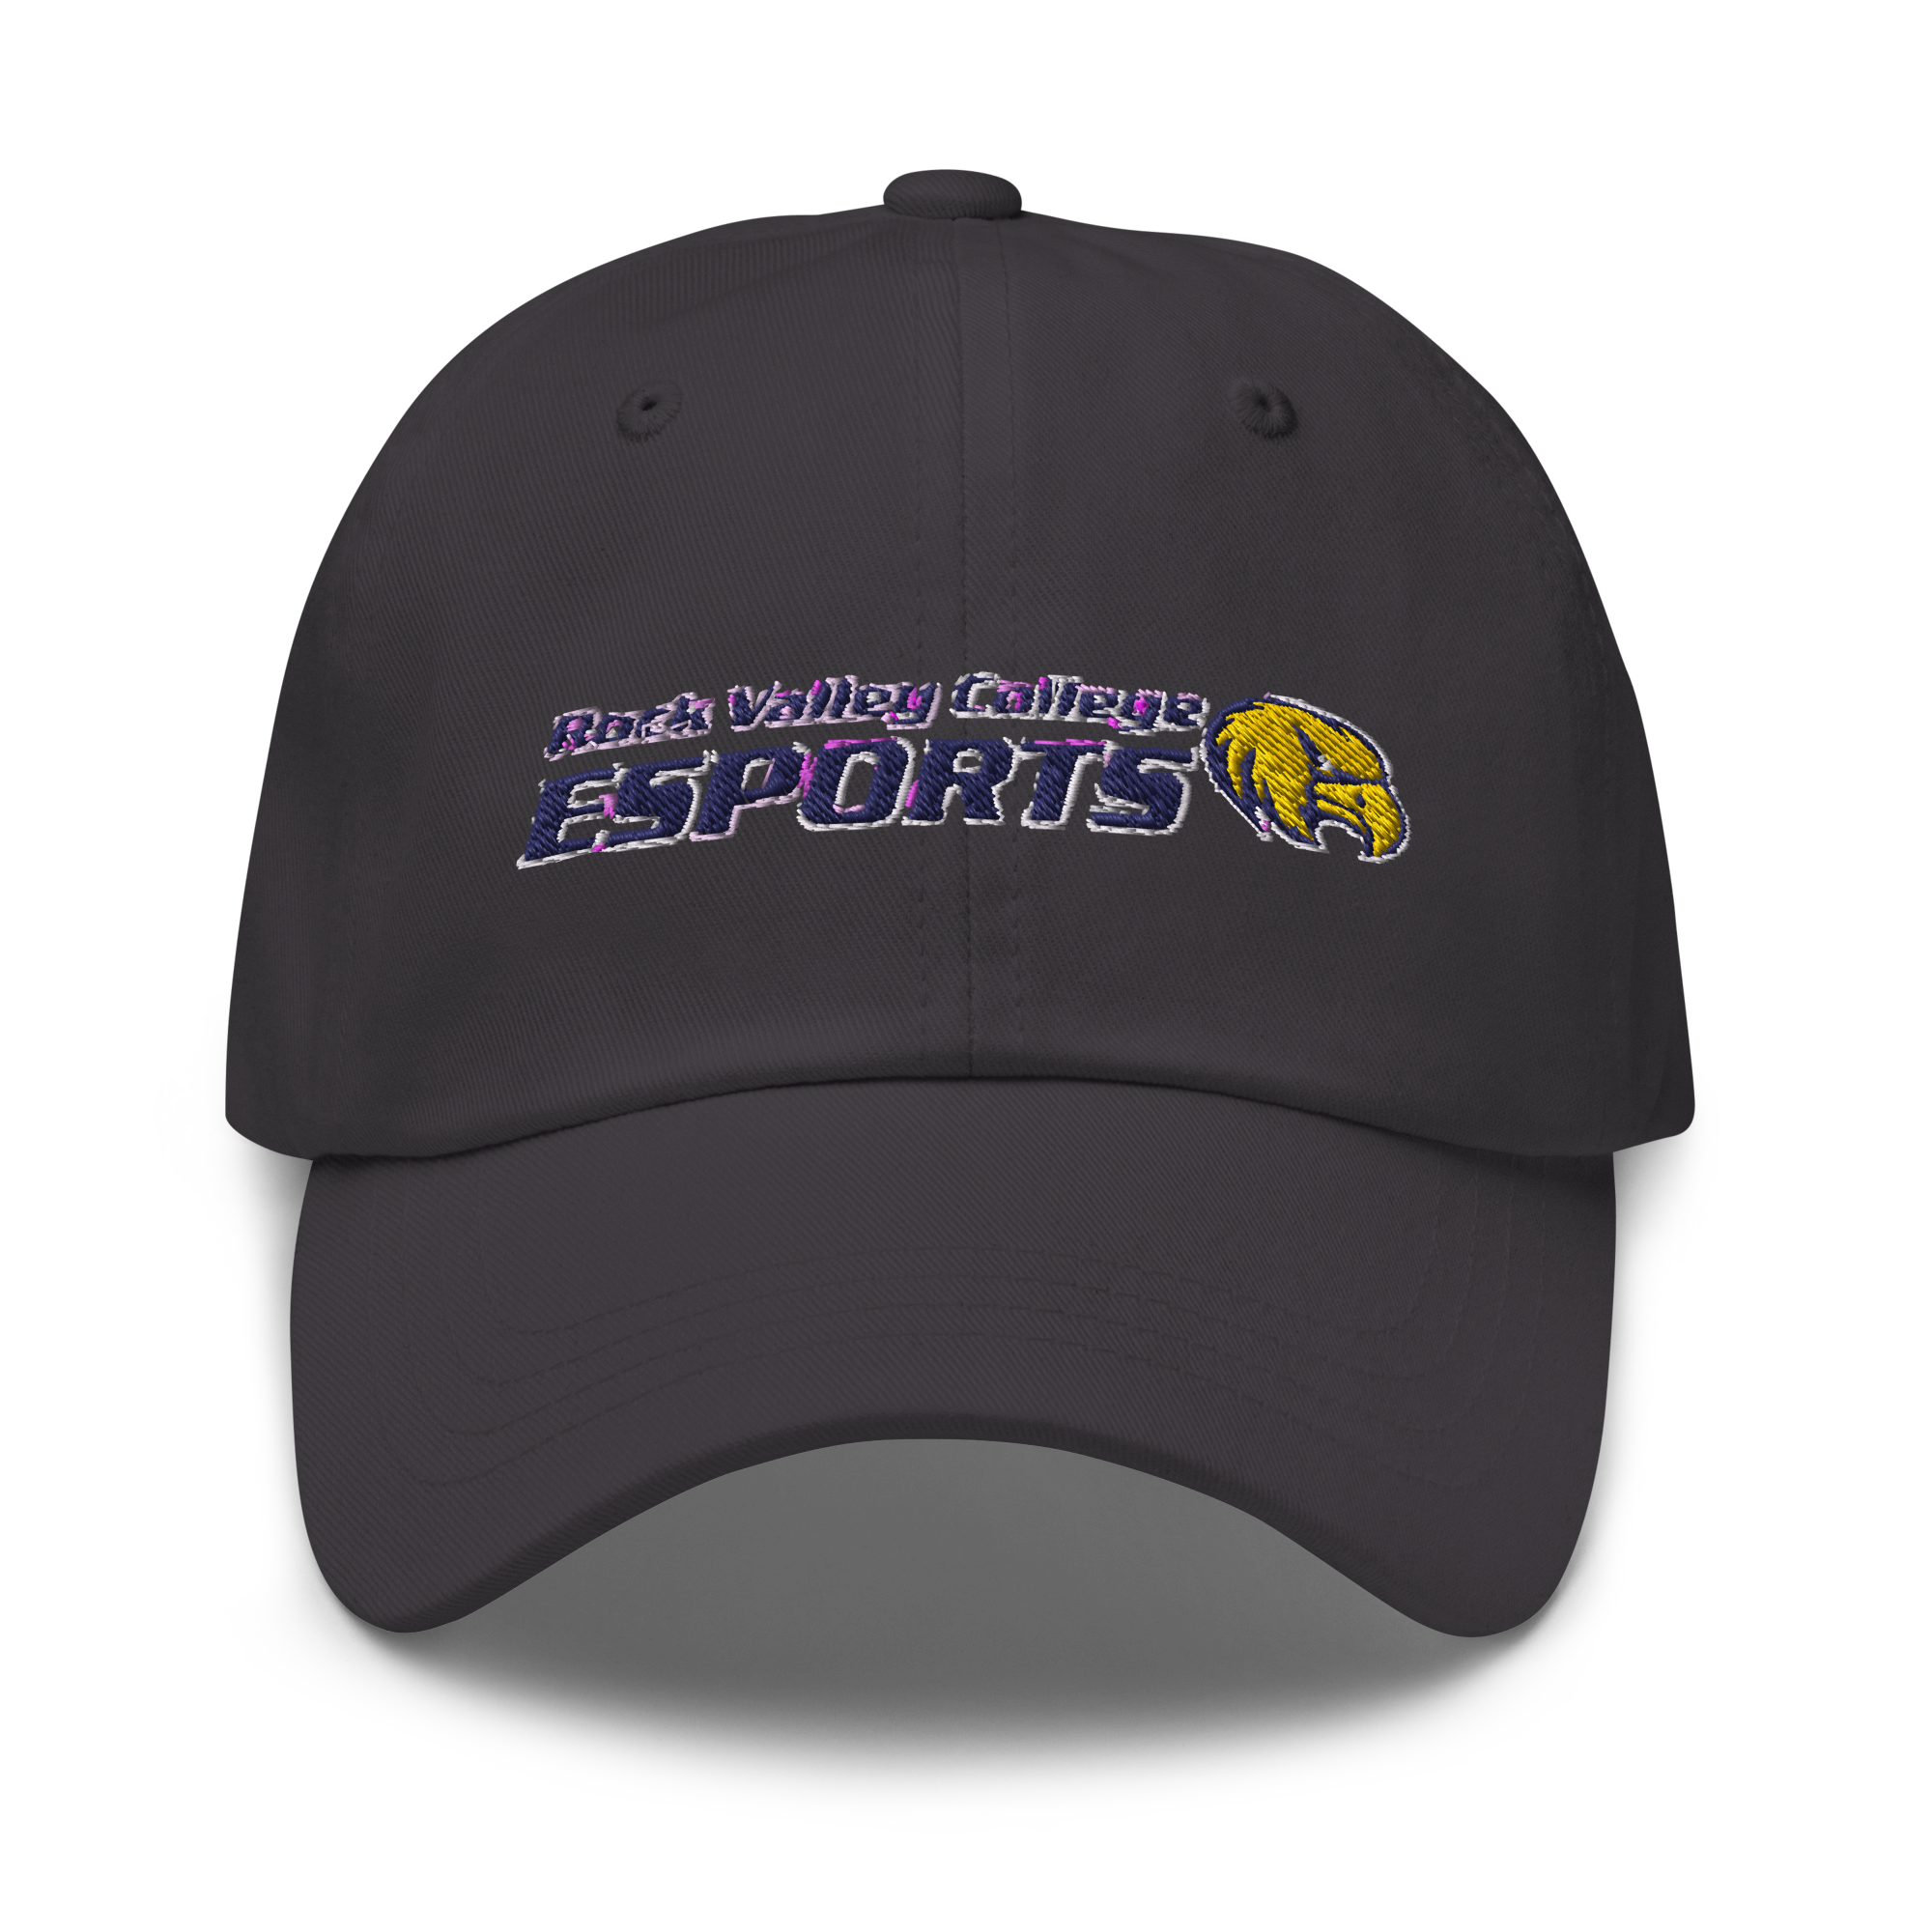 Rock Valley College | On Demand | Embroidered Dad Hat